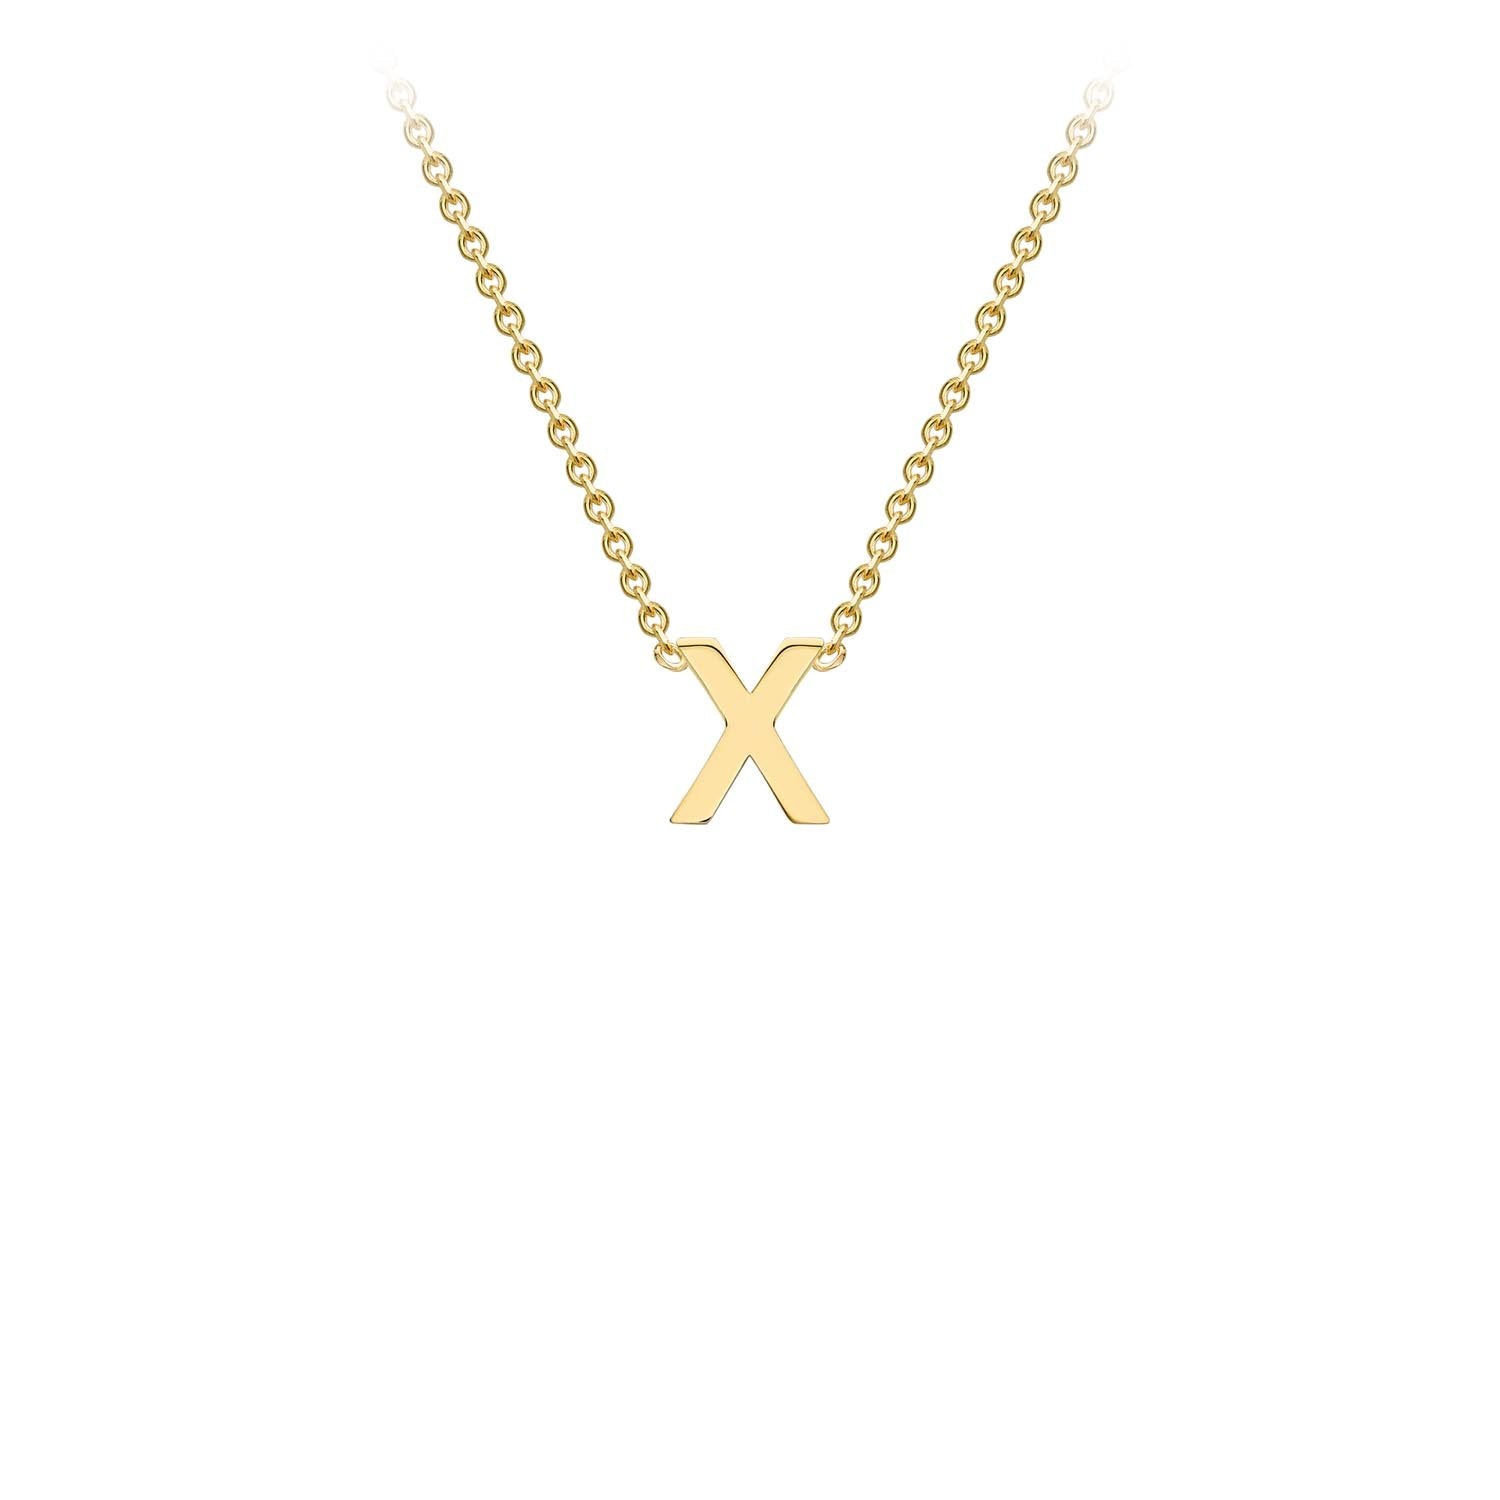 9ct Yellow Gold 'X' Initial Adjustable Letter Necklace 38/43cm